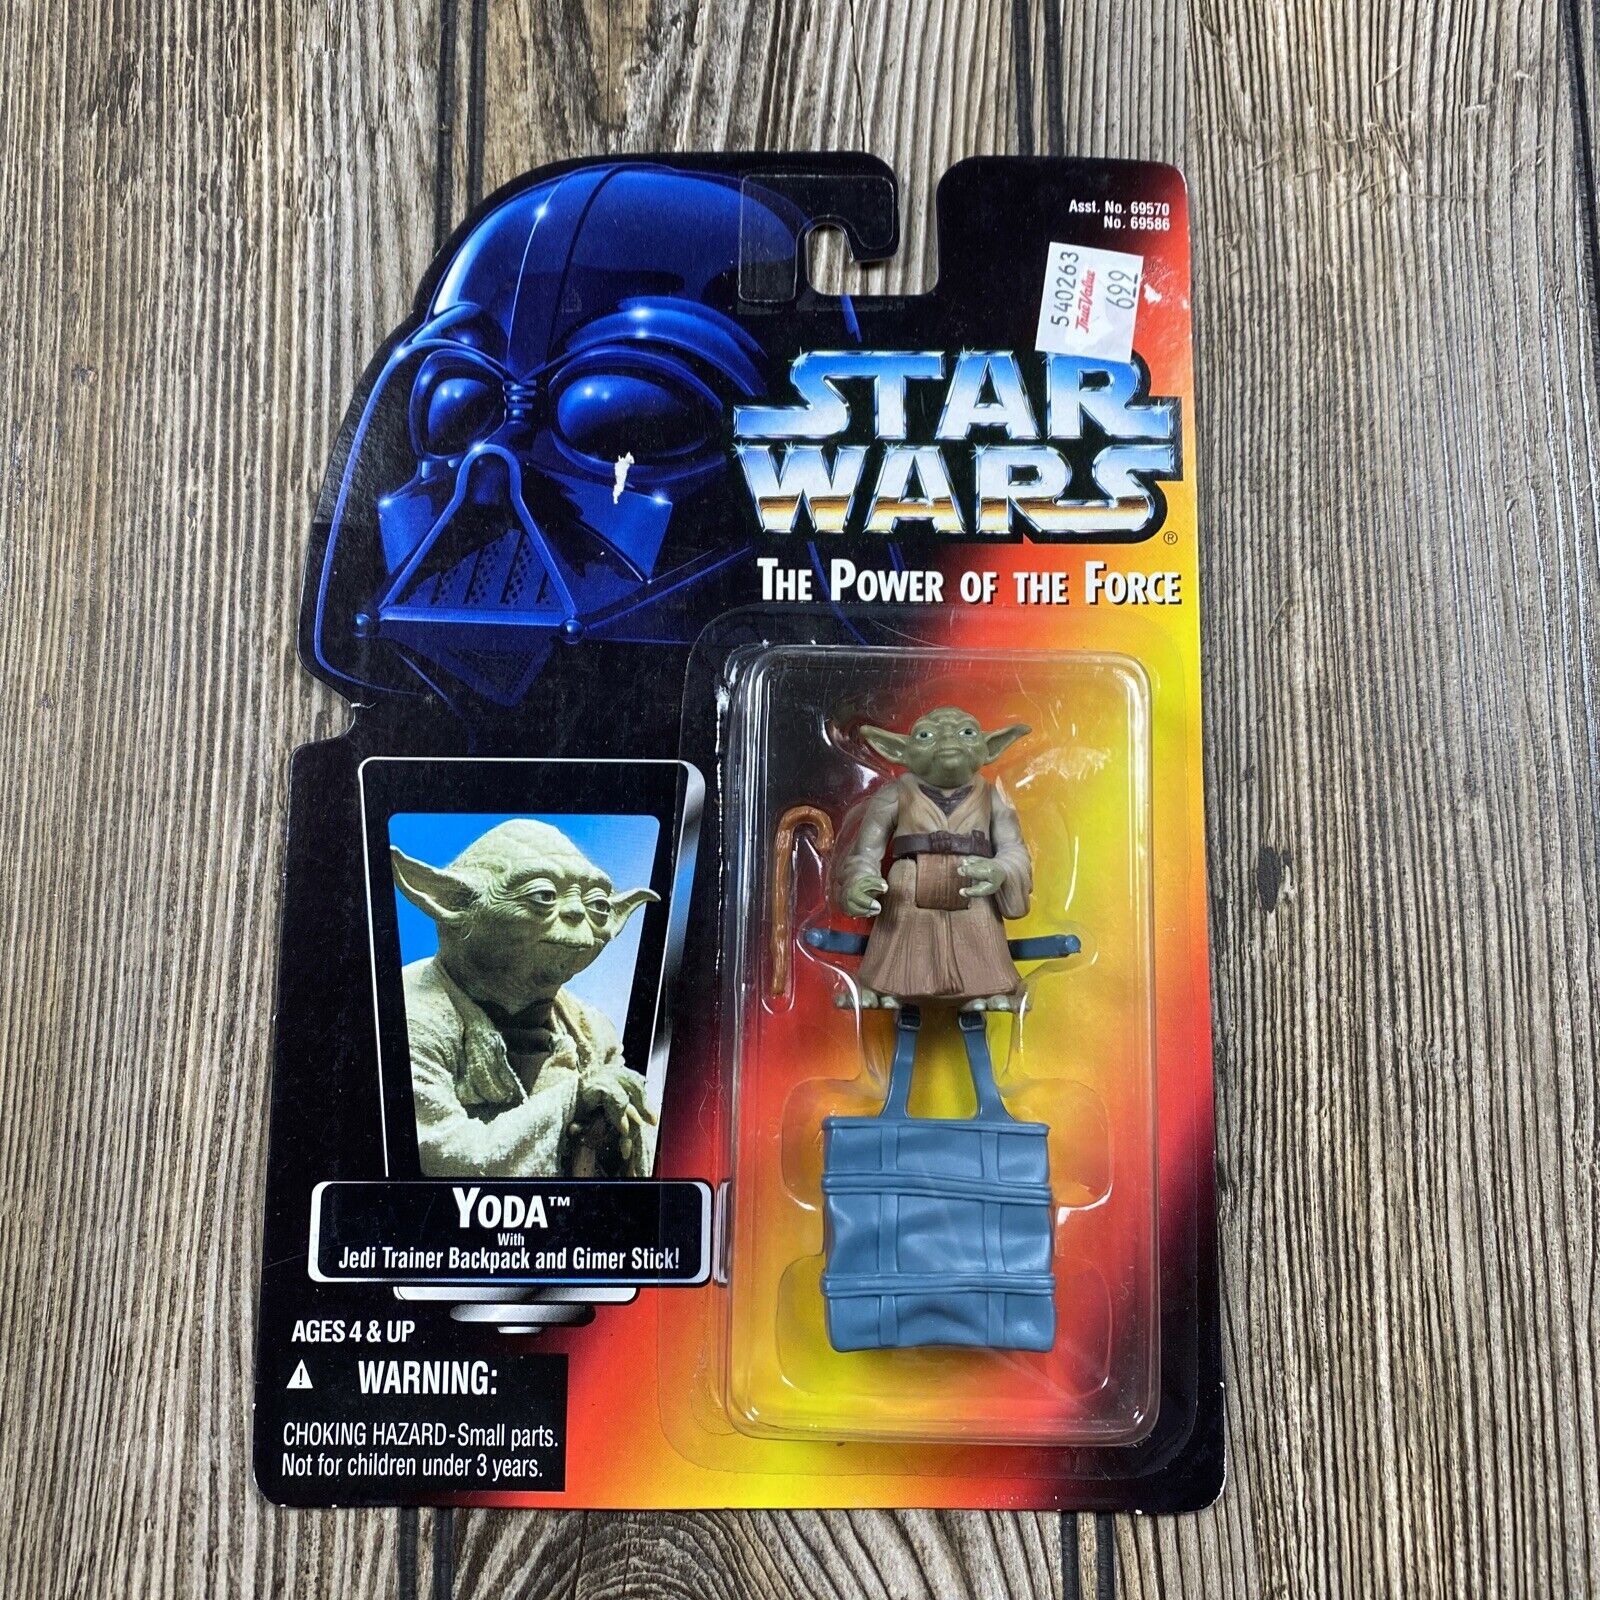 Star Wars Action Figure Yoda Power of the Force Red Carded Kenner 3.75 Inch Jedi